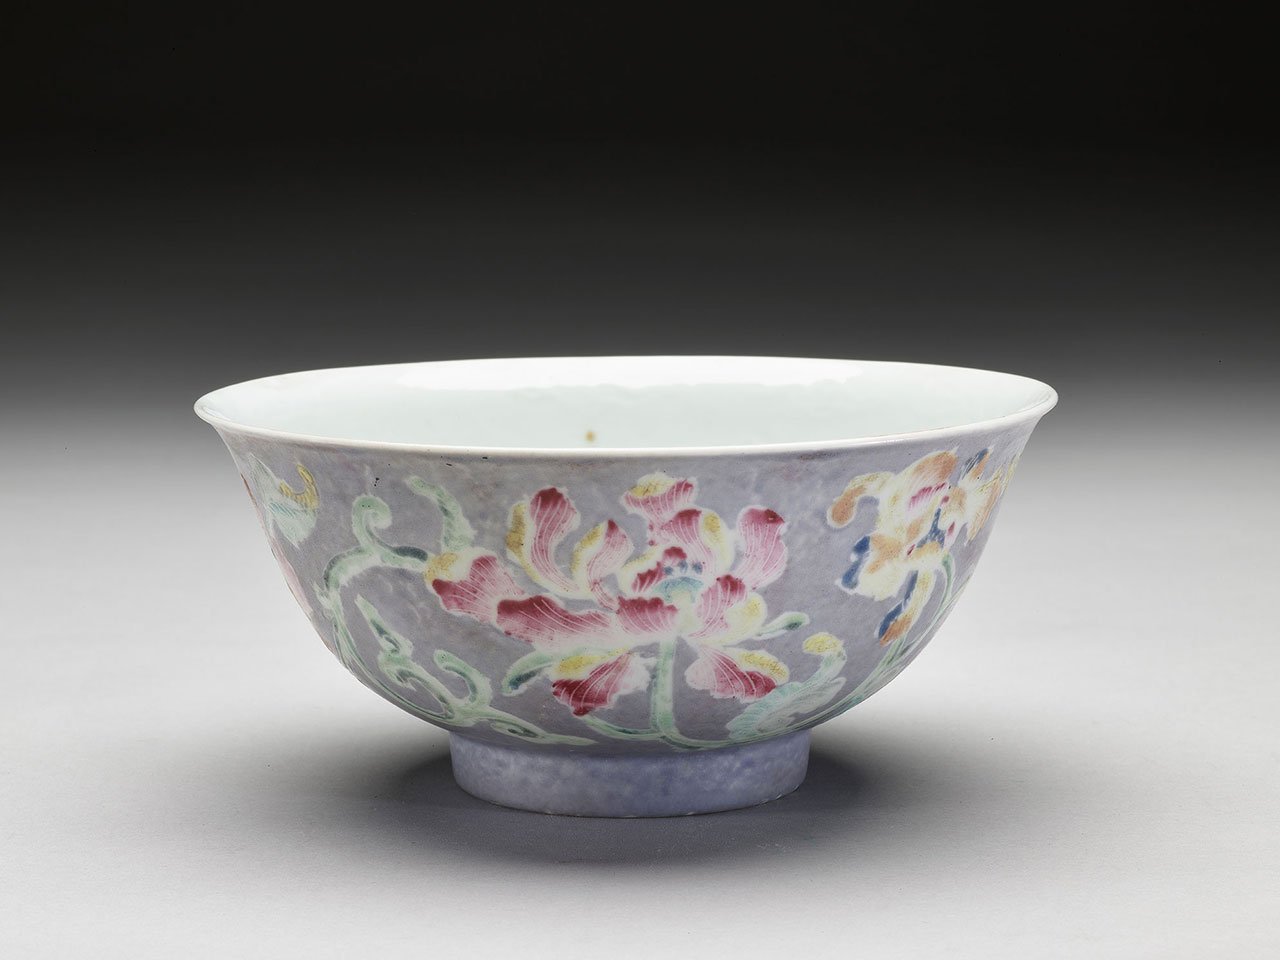 Bowl with flowers on a light-purple ground